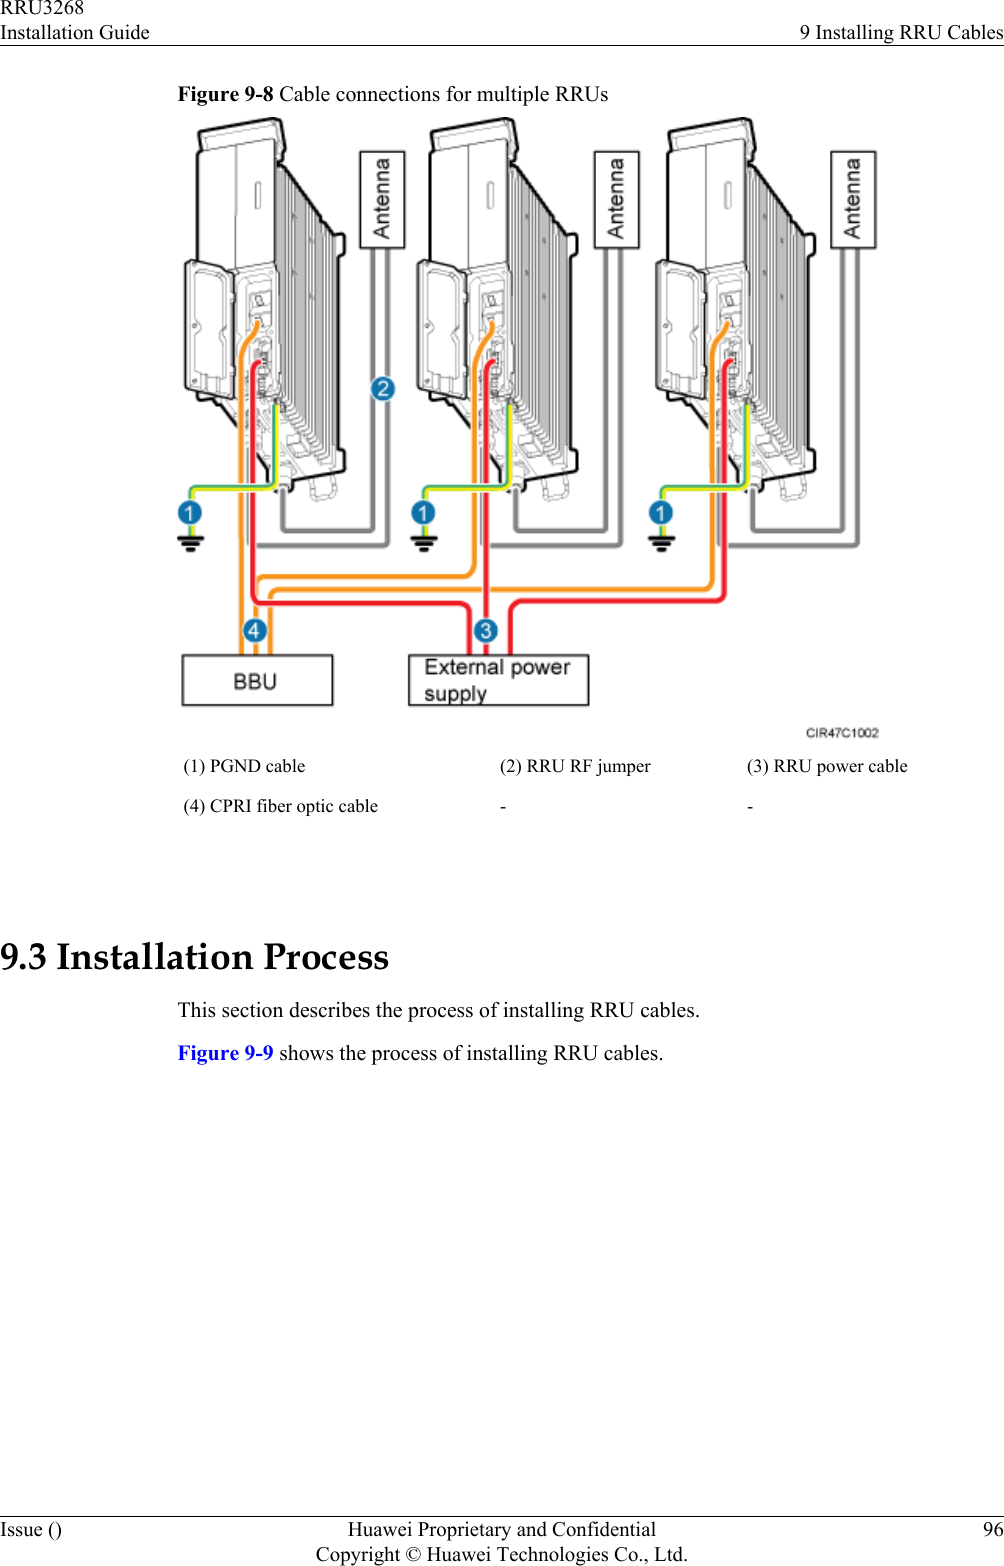 Figure 9-8 Cable connections for multiple RRUs(1) PGND cable (2) RRU RF jumper (3) RRU power cable(4) CPRI fiber optic cable - - 9.3 Installation ProcessThis section describes the process of installing RRU cables.Figure 9-9 shows the process of installing RRU cables.RRU3268Installation Guide 9 Installing RRU CablesIssue () Huawei Proprietary and ConfidentialCopyright © Huawei Technologies Co., Ltd.96